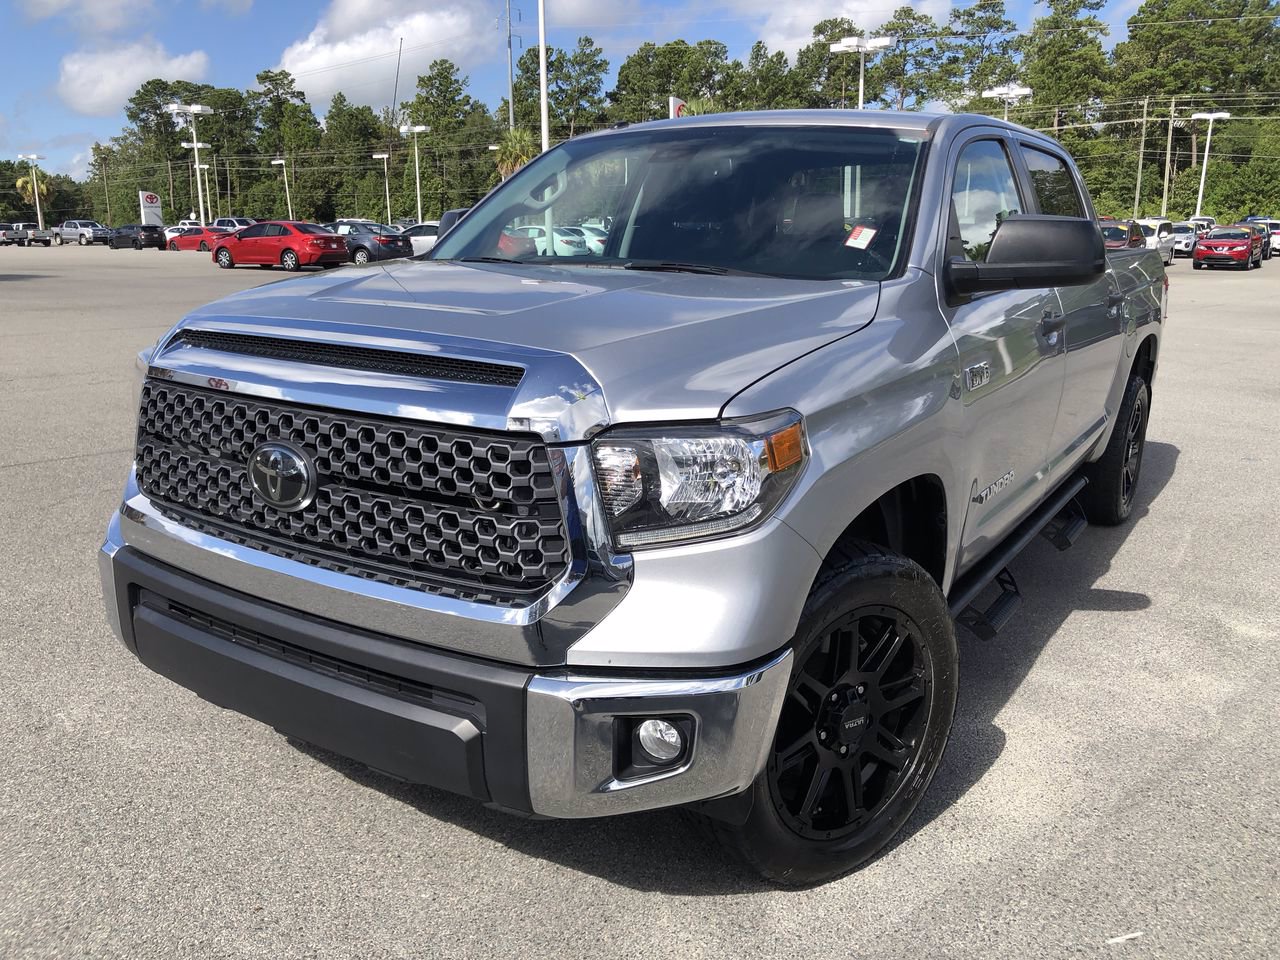 Certified Pre-Owned 2018 Toyota Tundra 2WD SR5 Crewmax